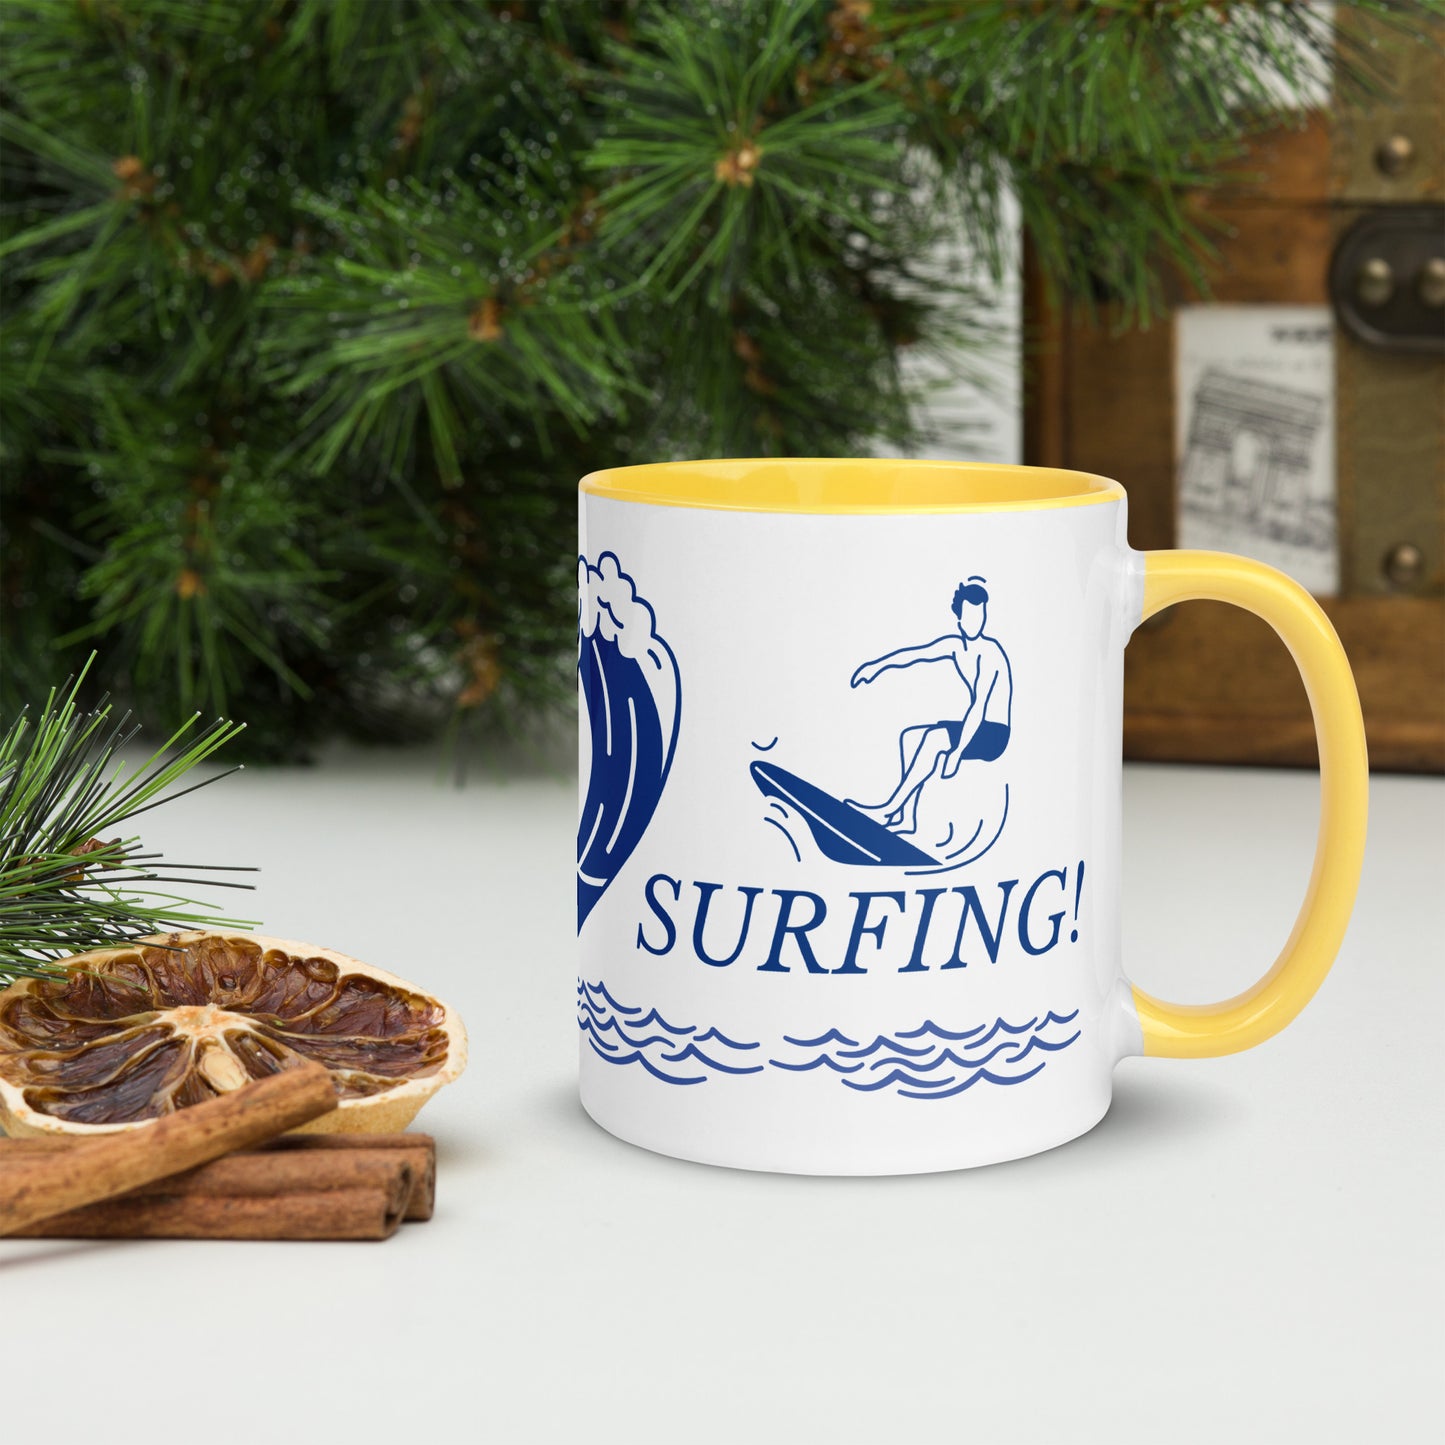 I Love Surfing Mug with Colour Inside by Our BoatyVerse